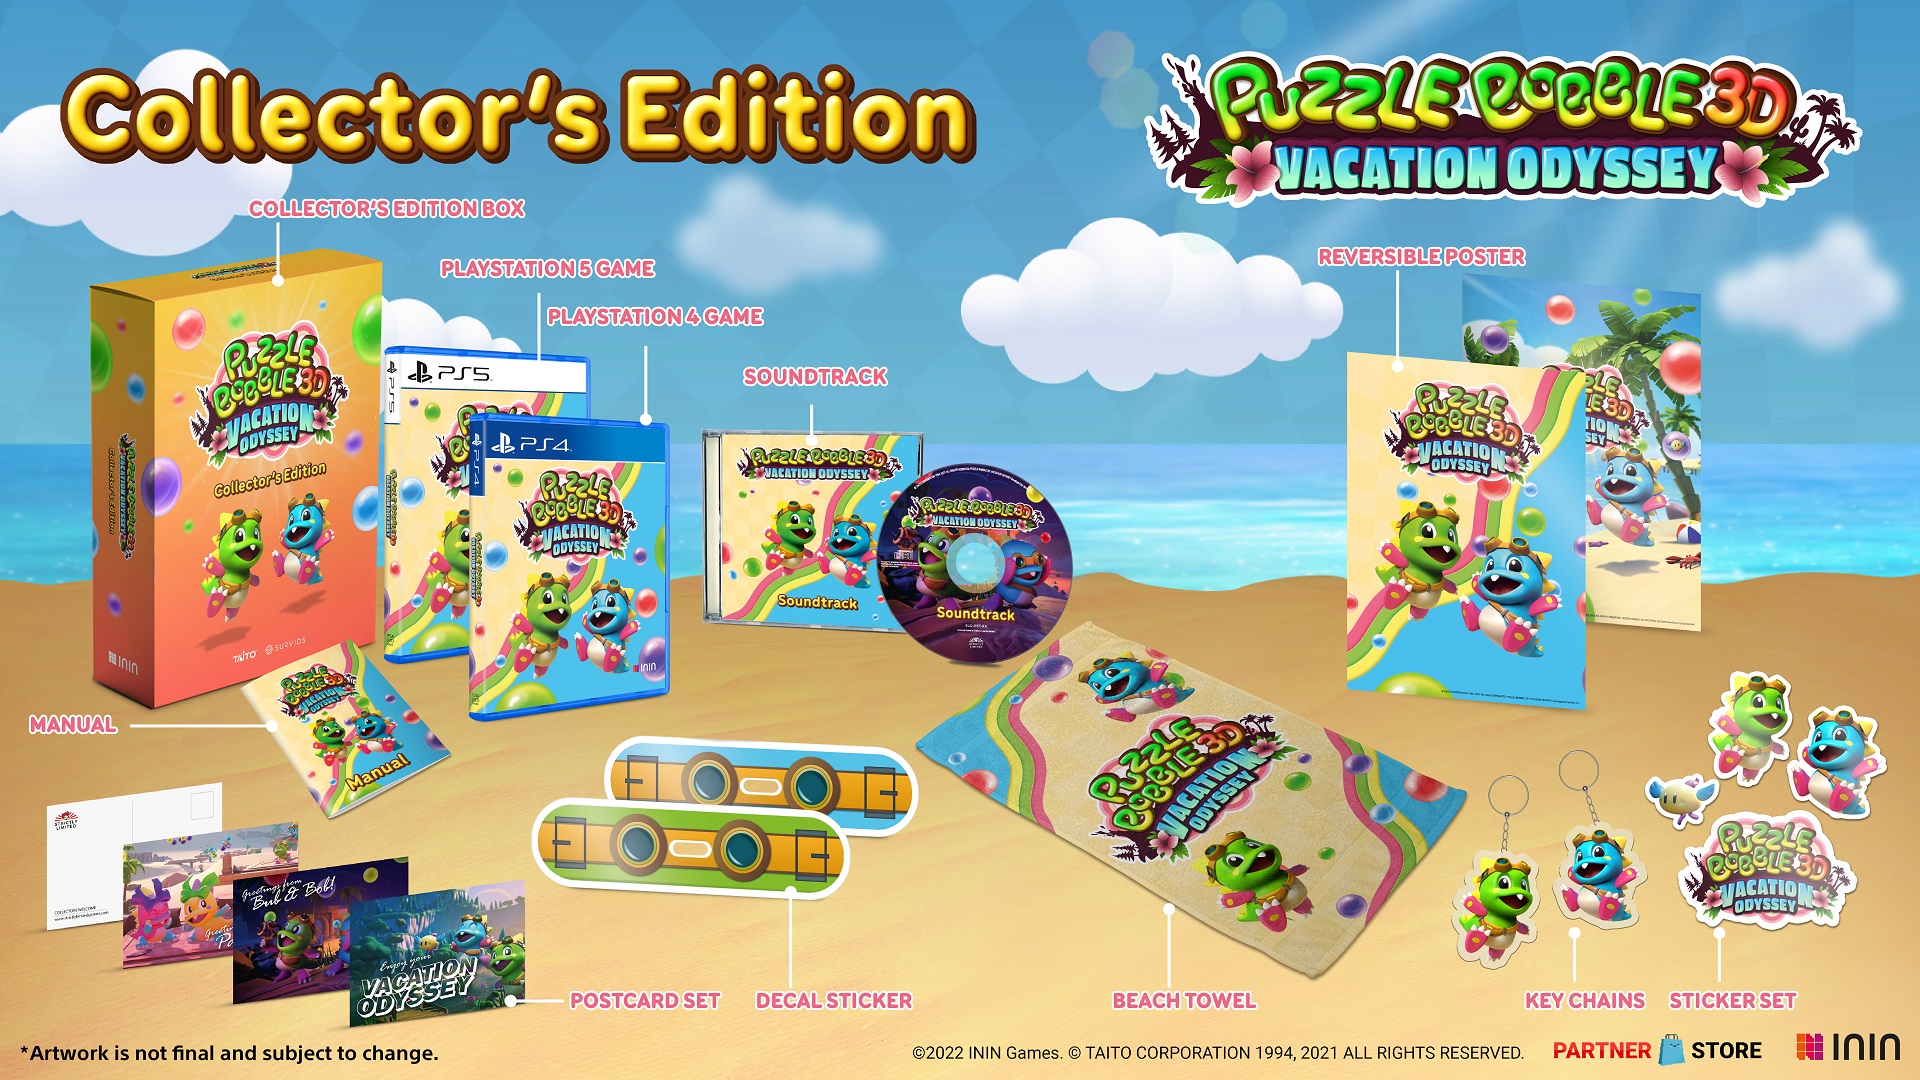 Puzzle Bobble 3D: Vacation Odyssey physical version